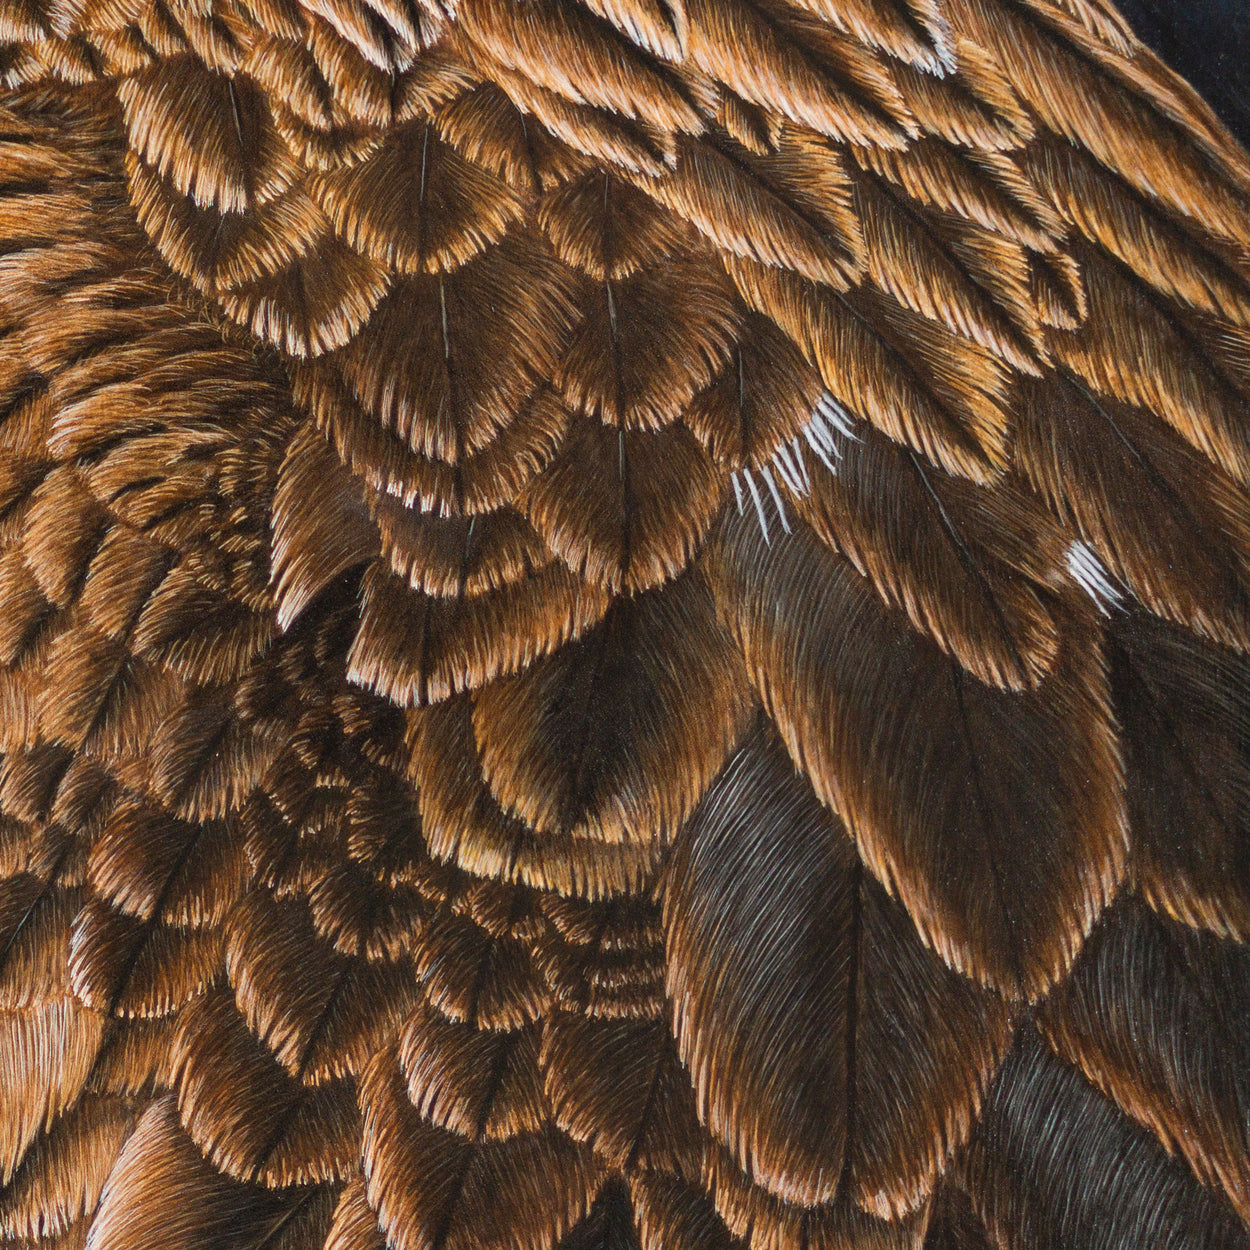 Red Kite Painting Close-up 2 - Jill Dimond